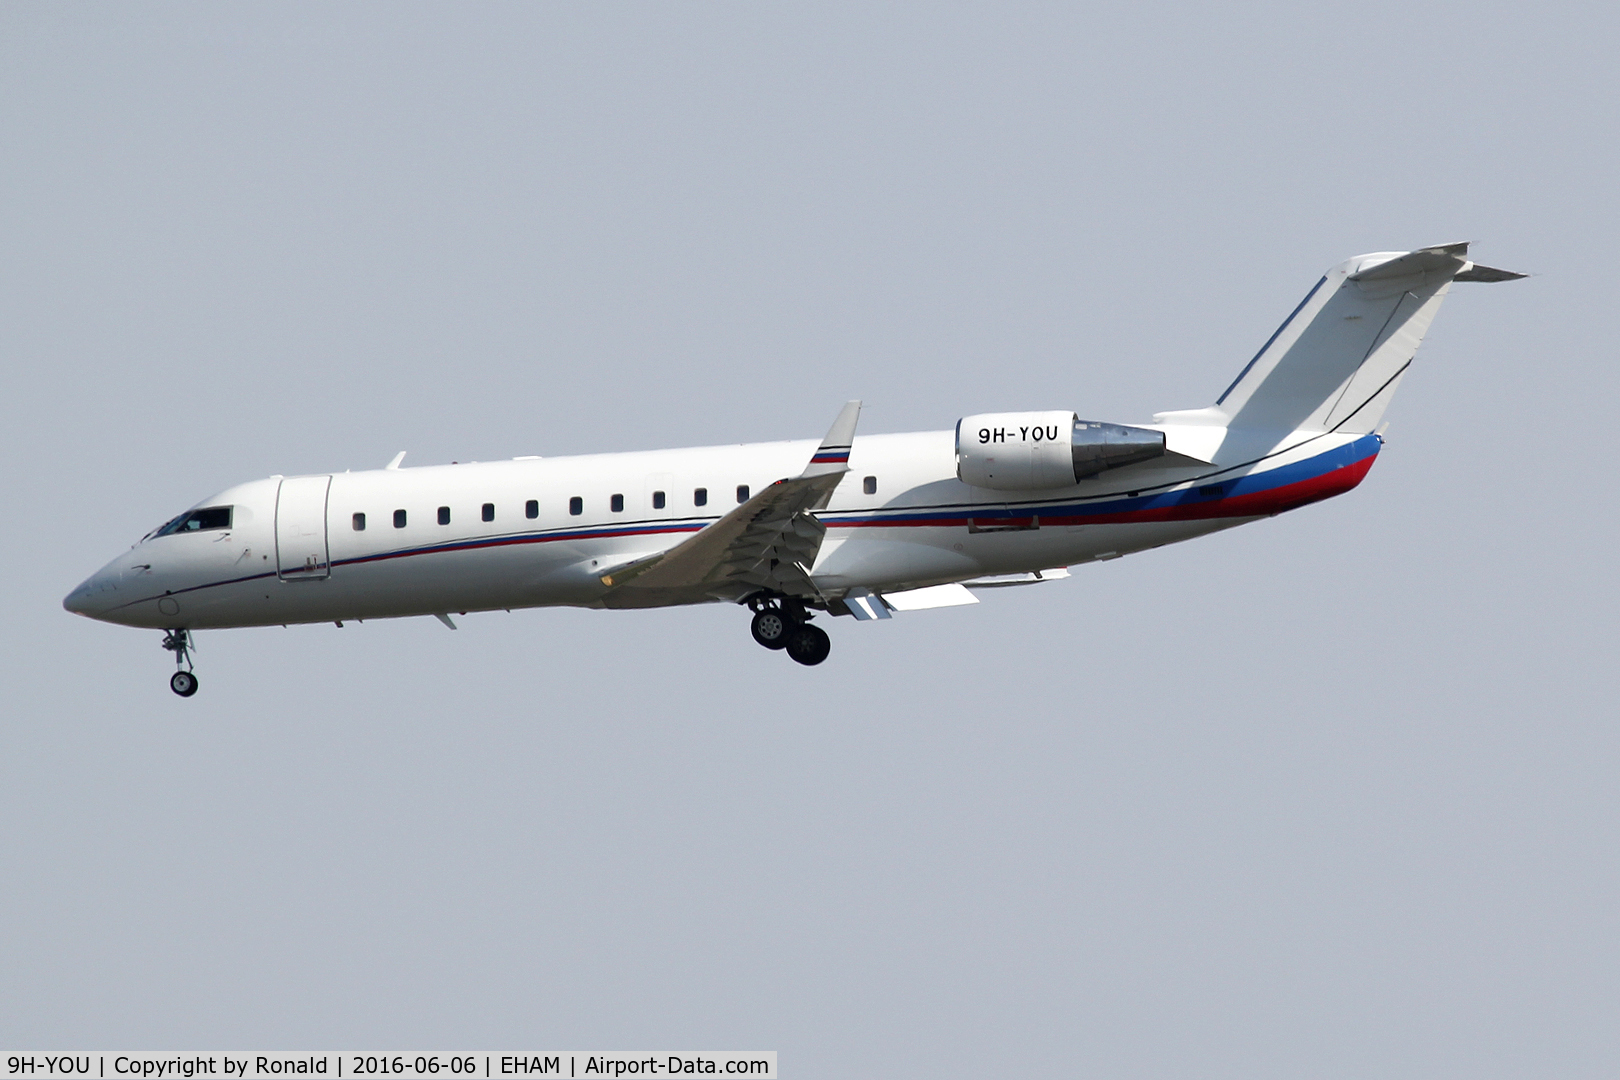 9H-YOU, 2008 Bombardier Challenger 850 (CL-600-2B19) C/N 8085, at spl